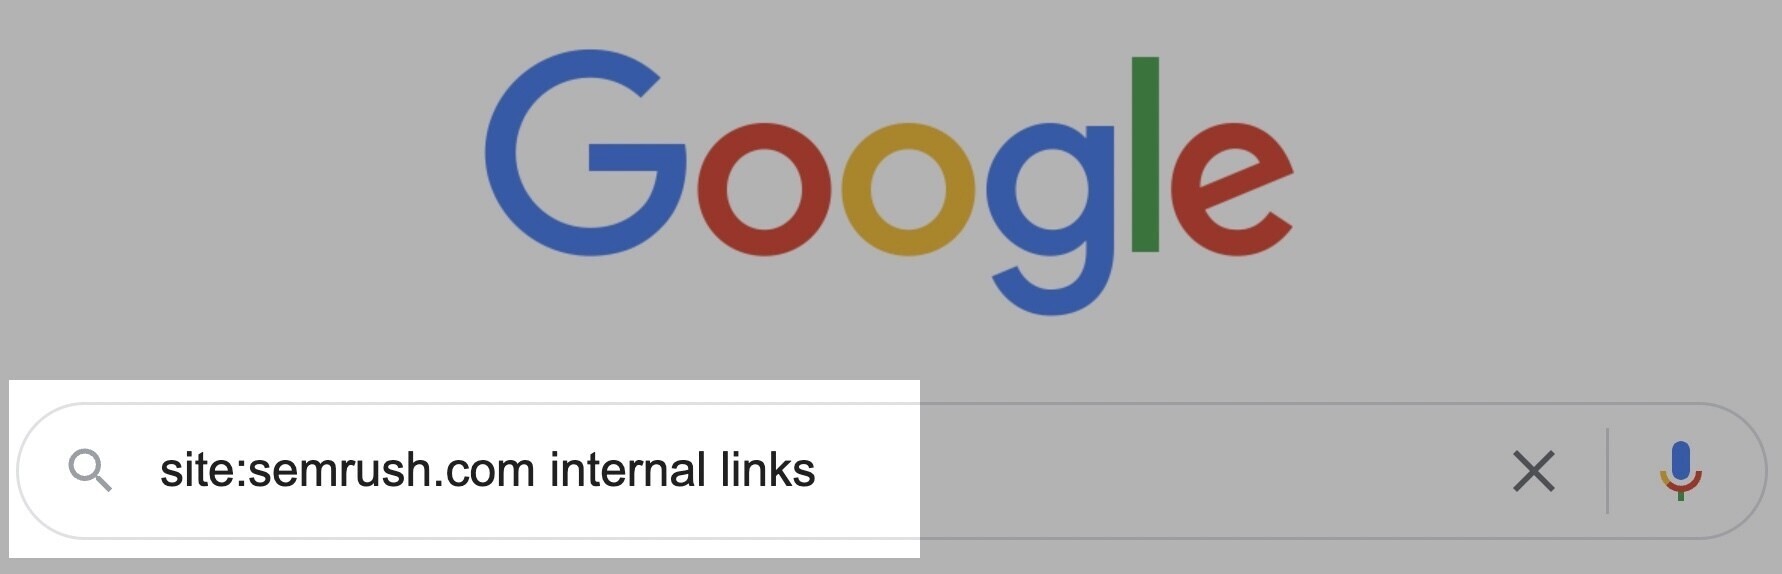 searching Google for Semrush pages about internal links